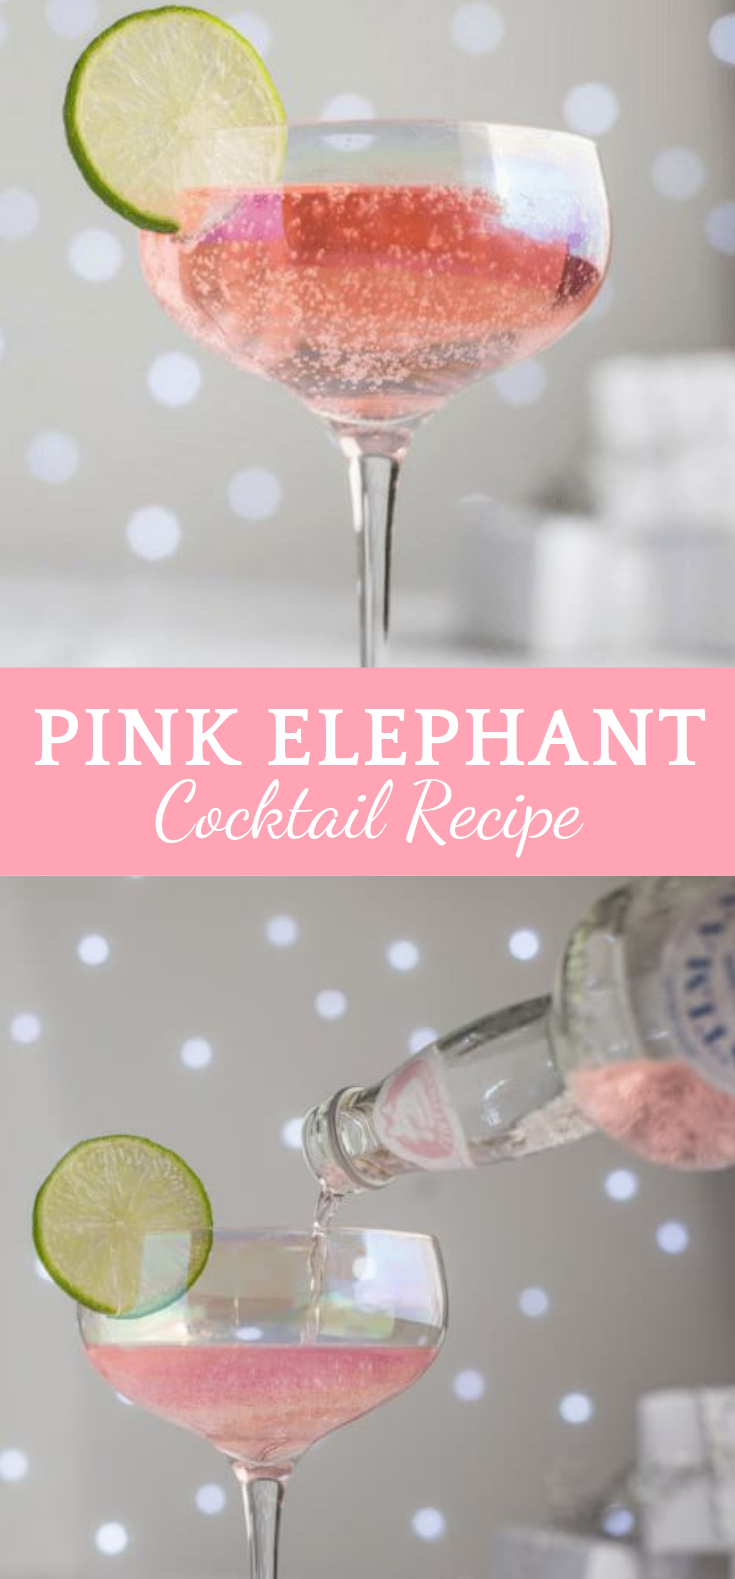 PINK ELEPHANT COCKTAIL RECIPE #Cocktail #Drink